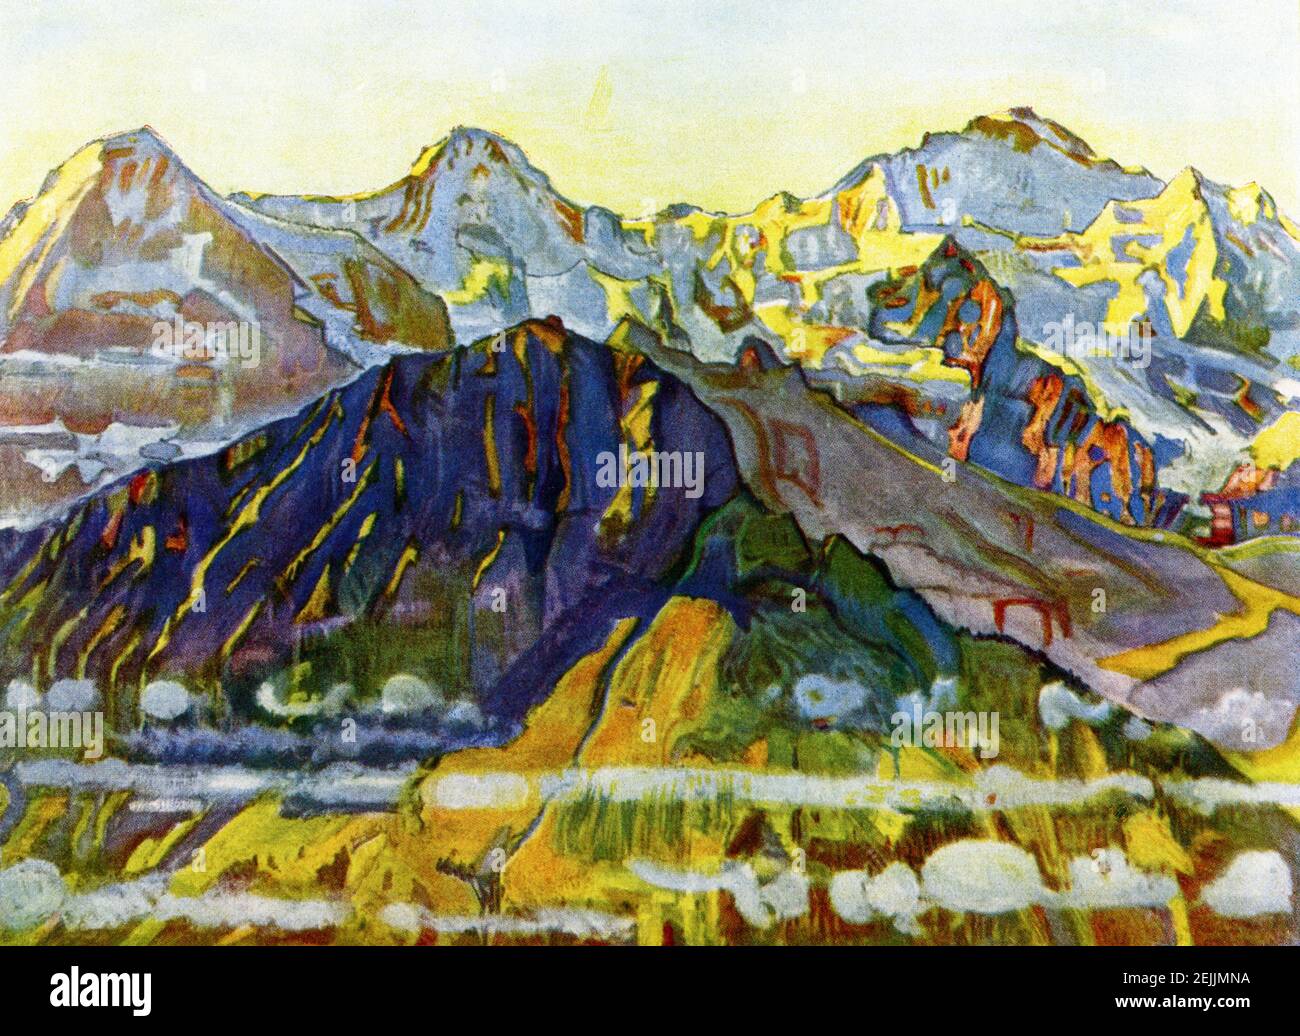 This image shows  the Eiger Monch  Und Jungfrau (Eiger, Monch, and Jungfrau Mountains in the Bernese Alps) by Ferdinand Hodler, which is in a private collection  in Ruti in the Canton of Zurich. This painting  was created in 1908 by Ferdinand Hodler  (1853-1918) in Symbolism style. He was one of the best-known Swiss painters of the 19th century. His early works were portraits, landscapes, and genre paintings in a realistic style. Later, he adopted a personal form of symbolism which he called 'parallelism.” Stock Photo